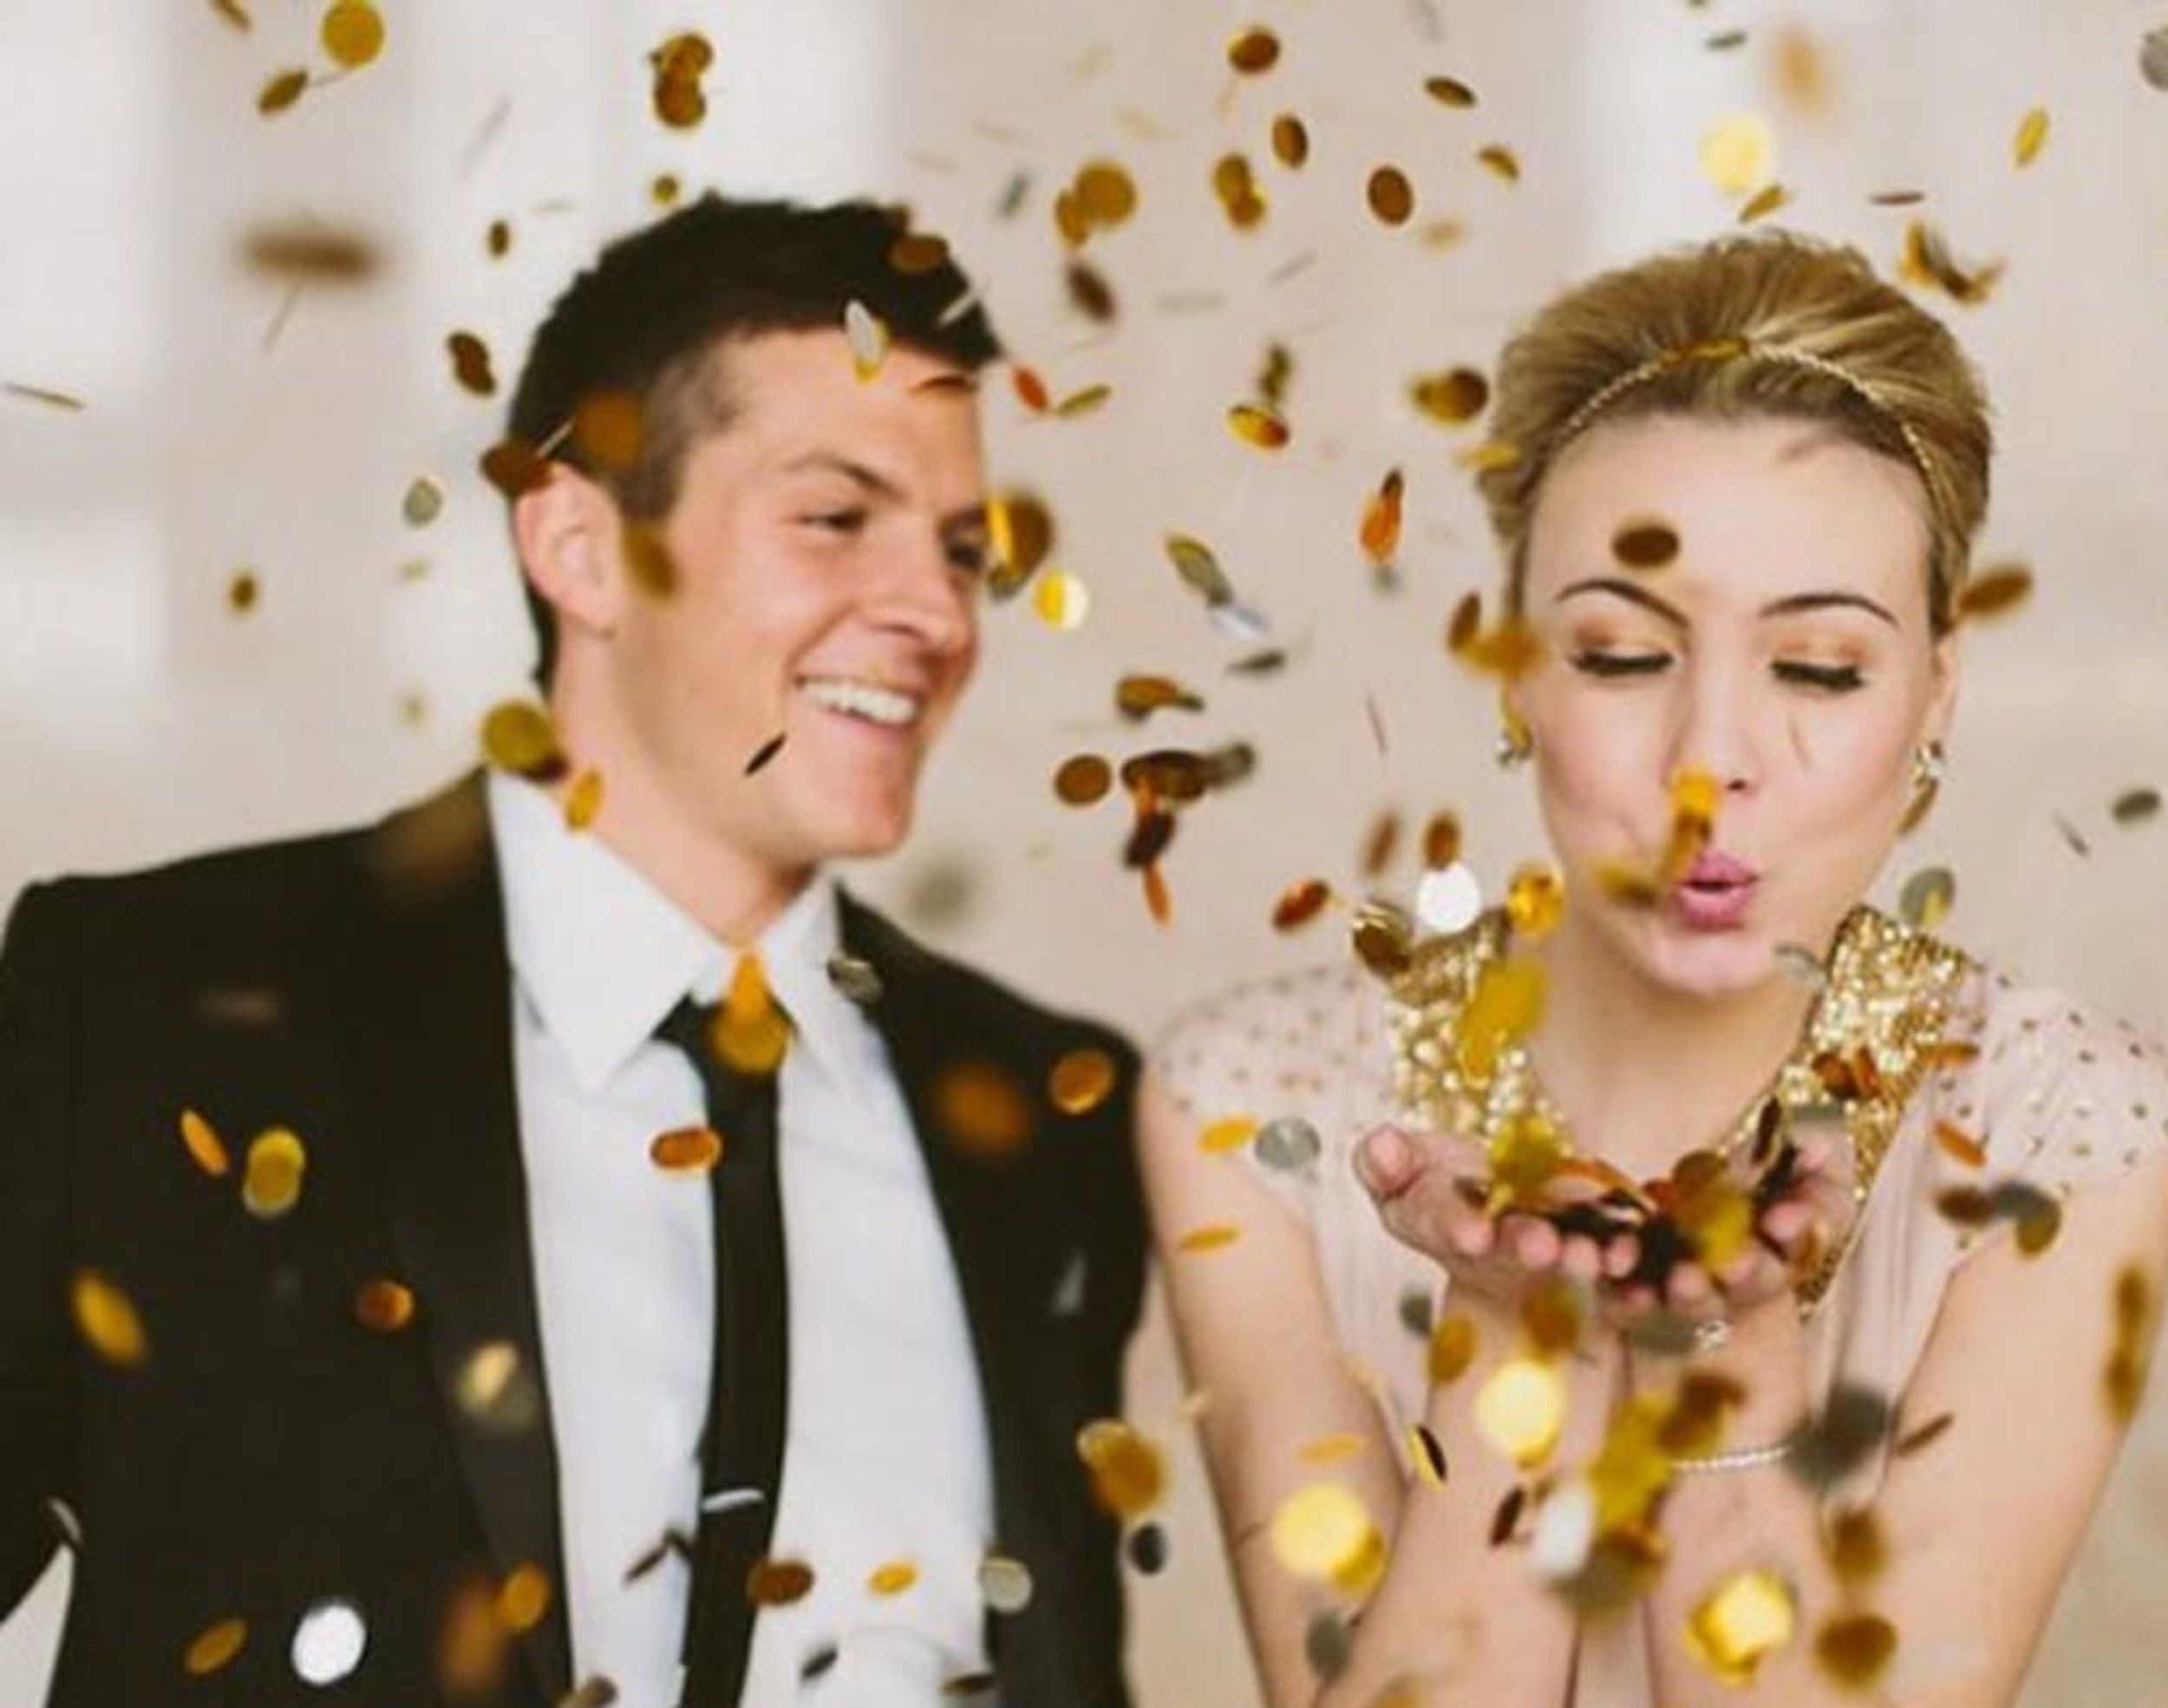 22 Ideas for a New Year’s Eve Wedding